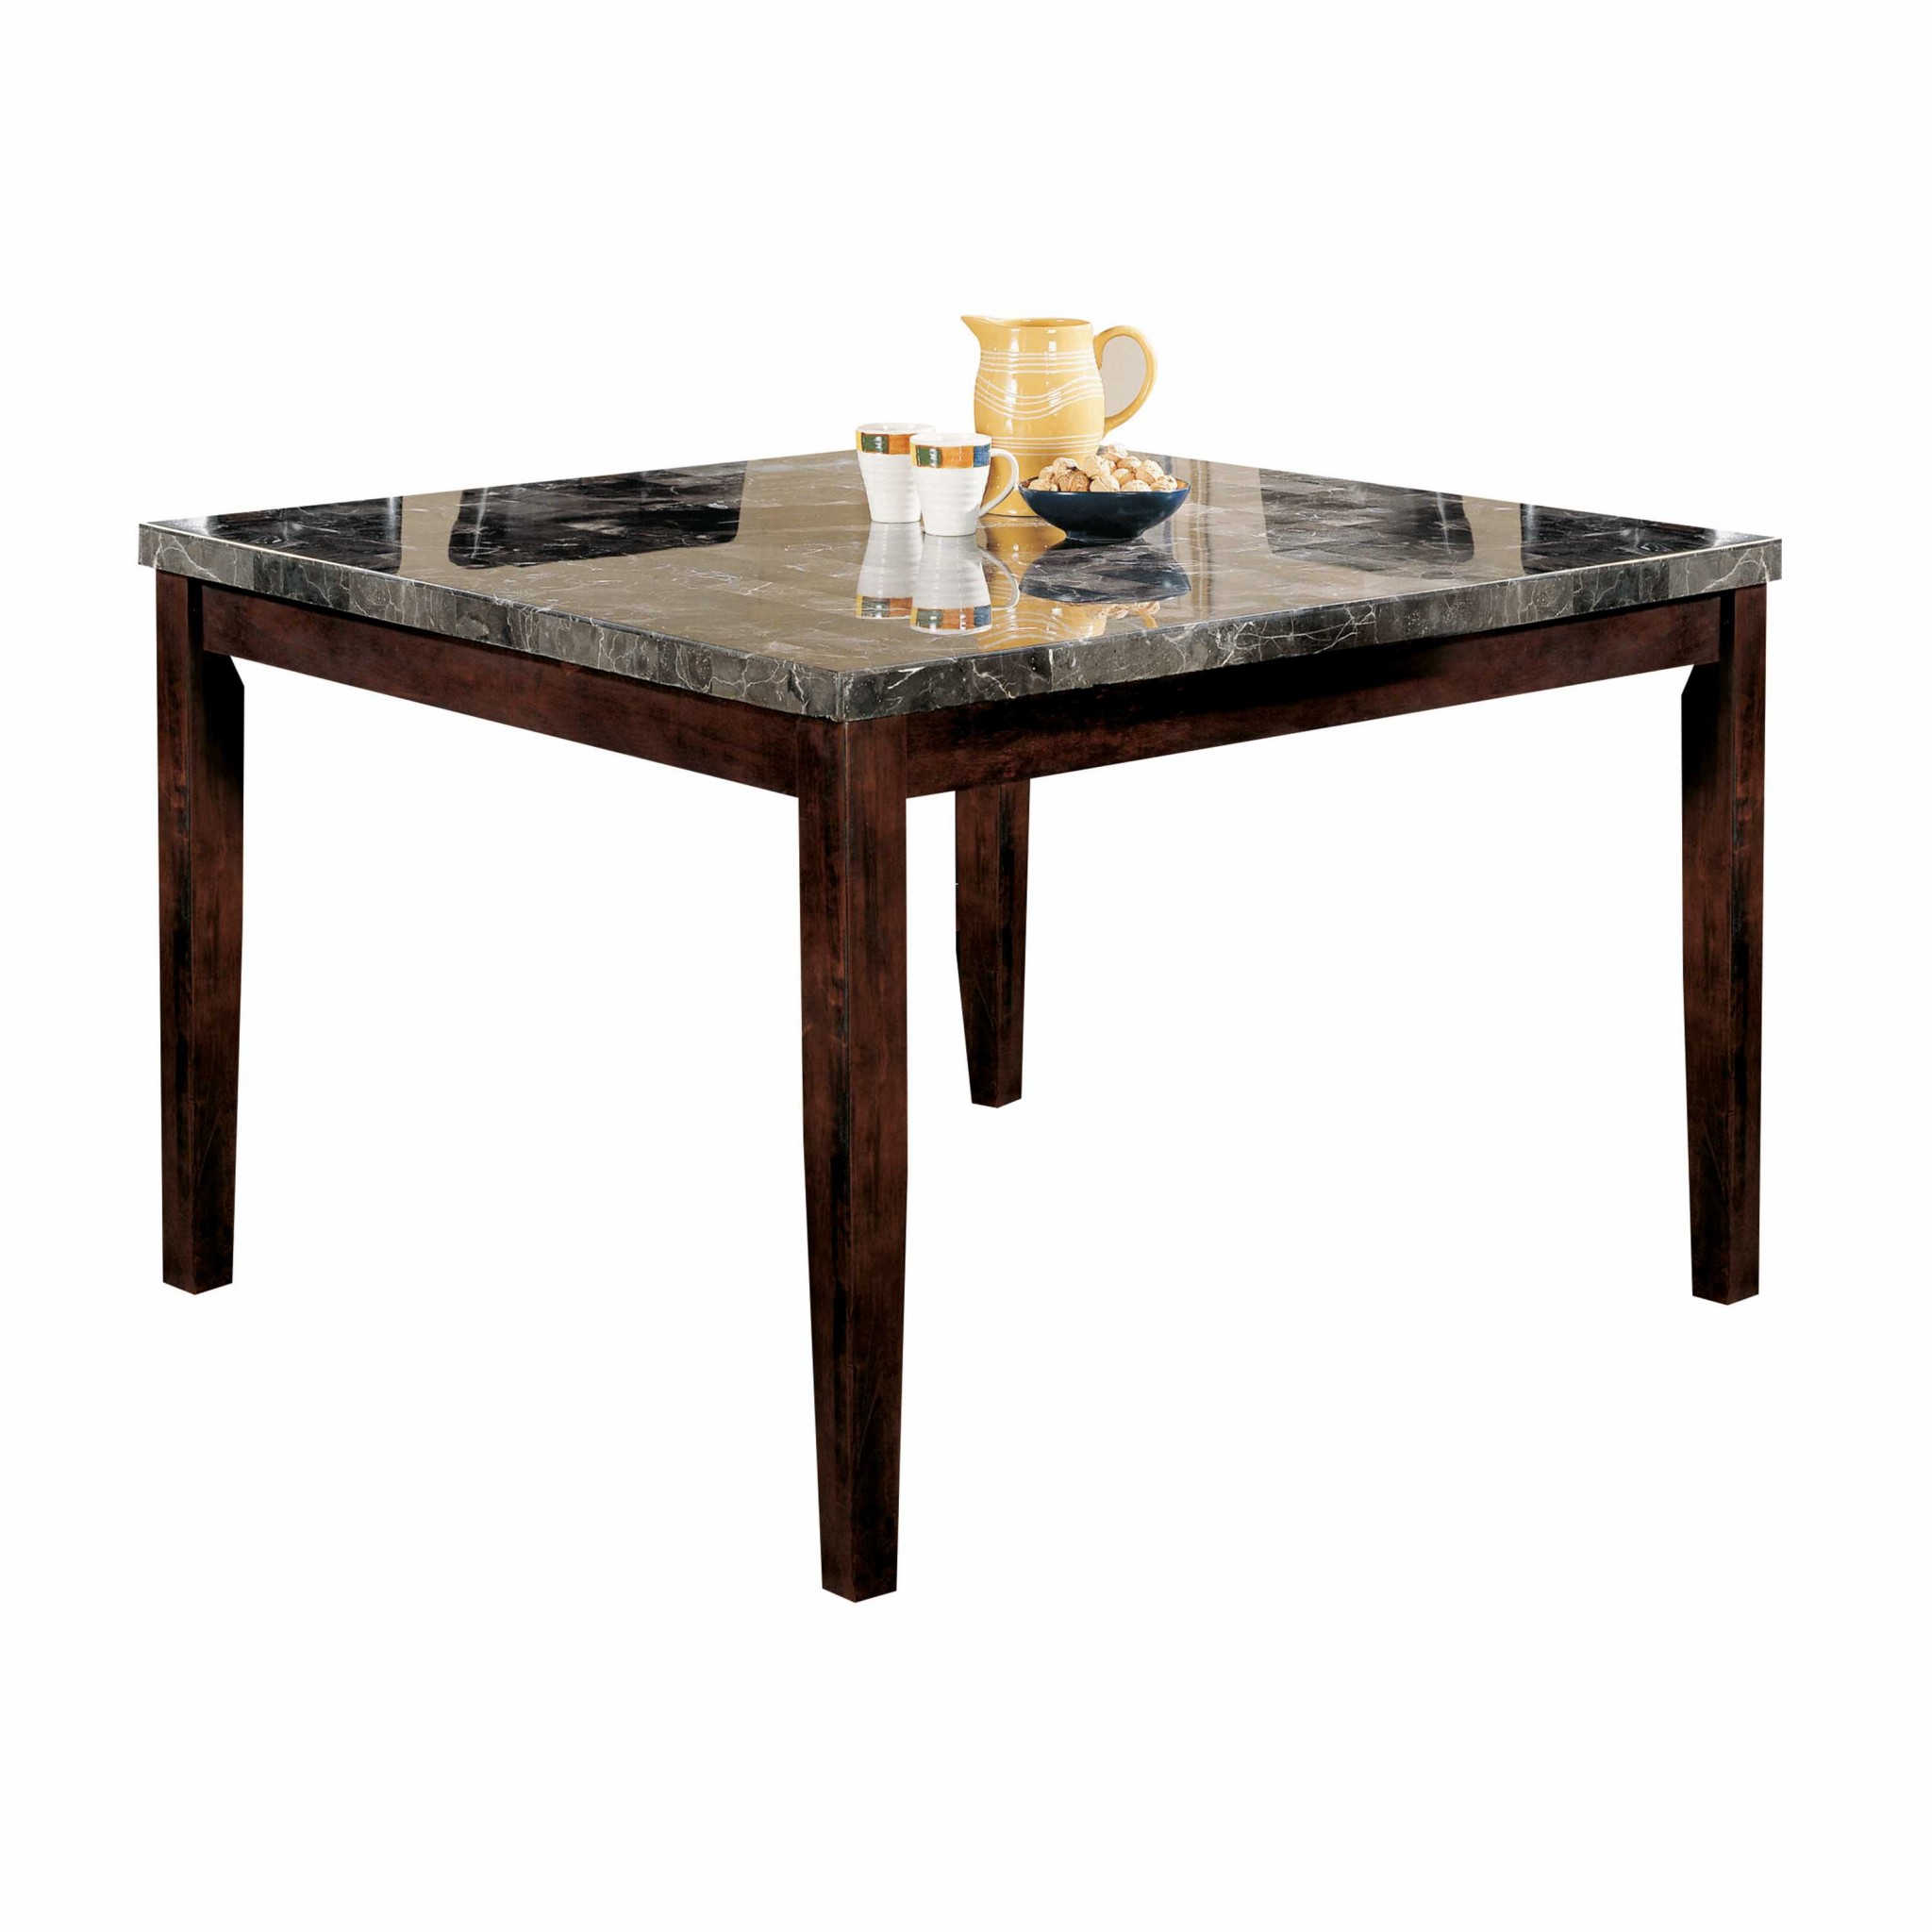 54" X 54" X 36" Black Marble Walnut Wood Counter Height Table